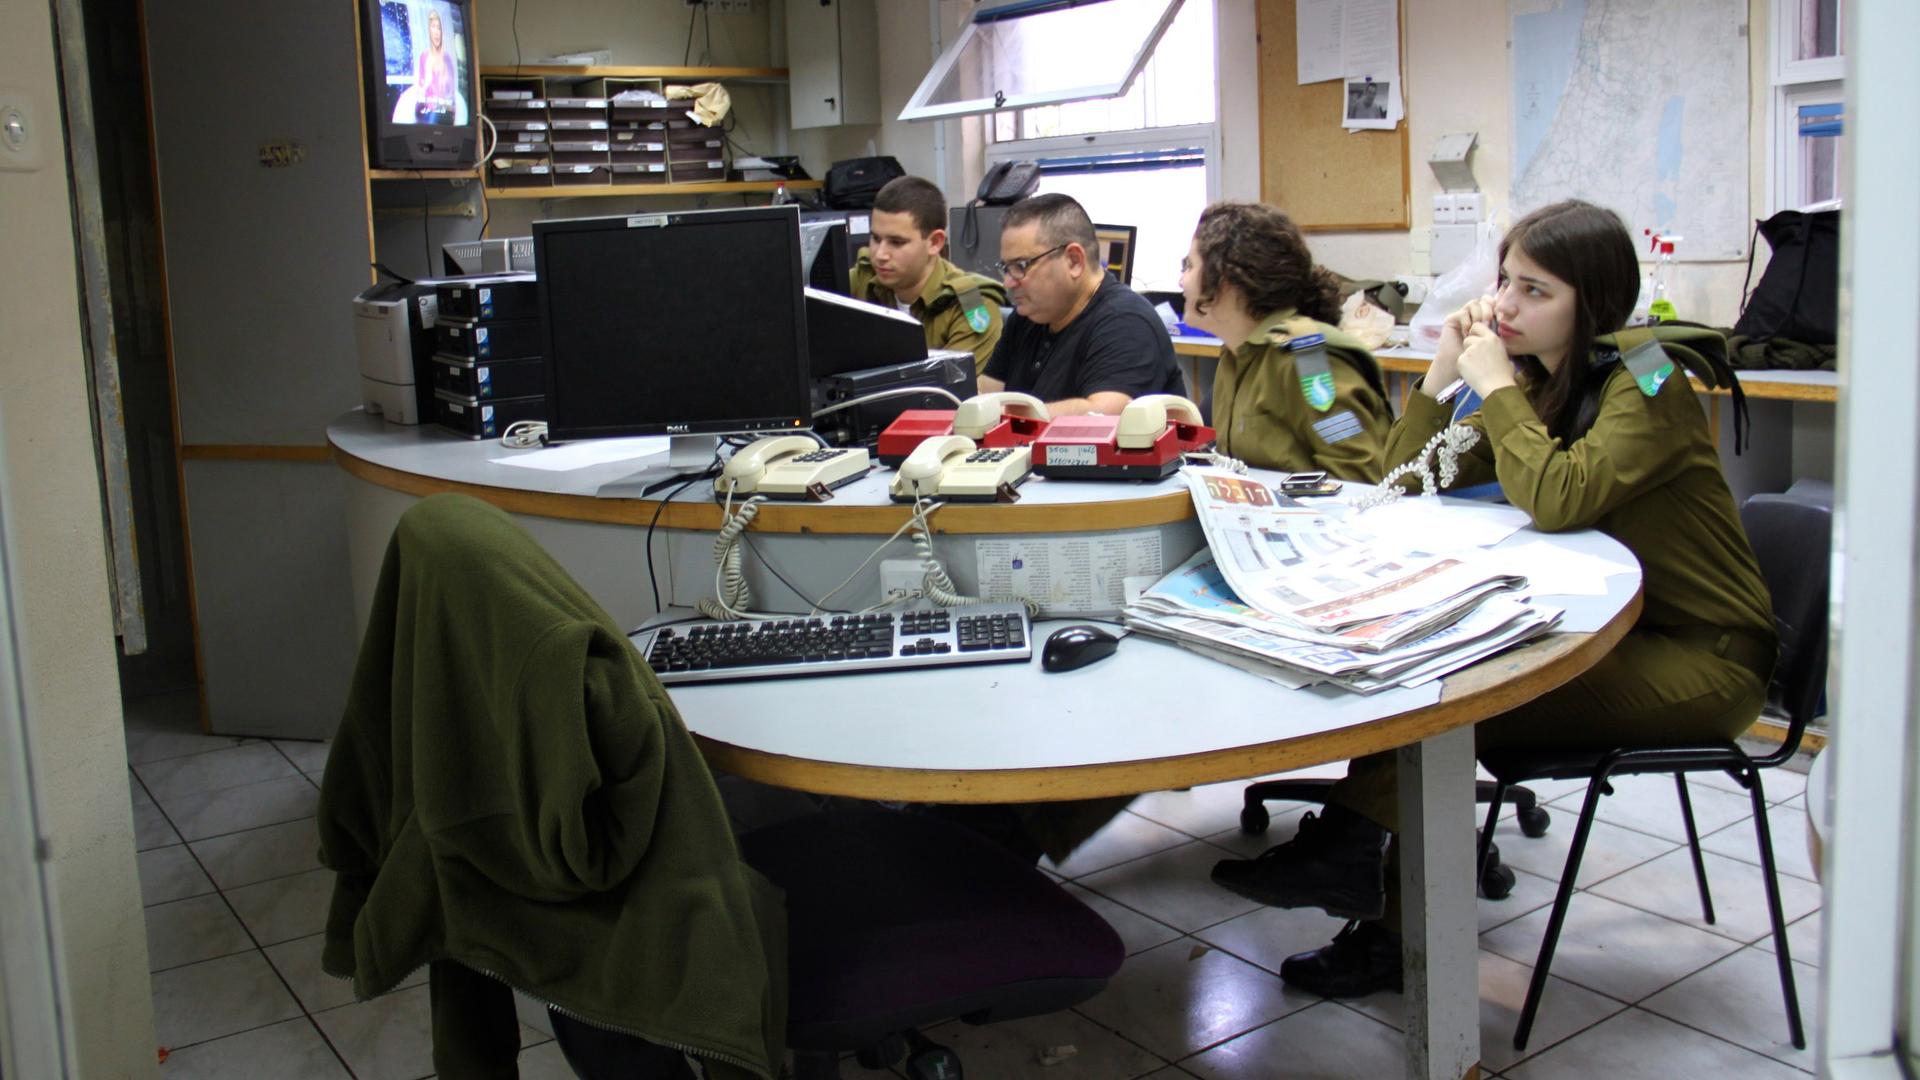 The offices may look like a college radio station, but this is Israeli Army Radio, the country's most popular purveyor of radio news and music.